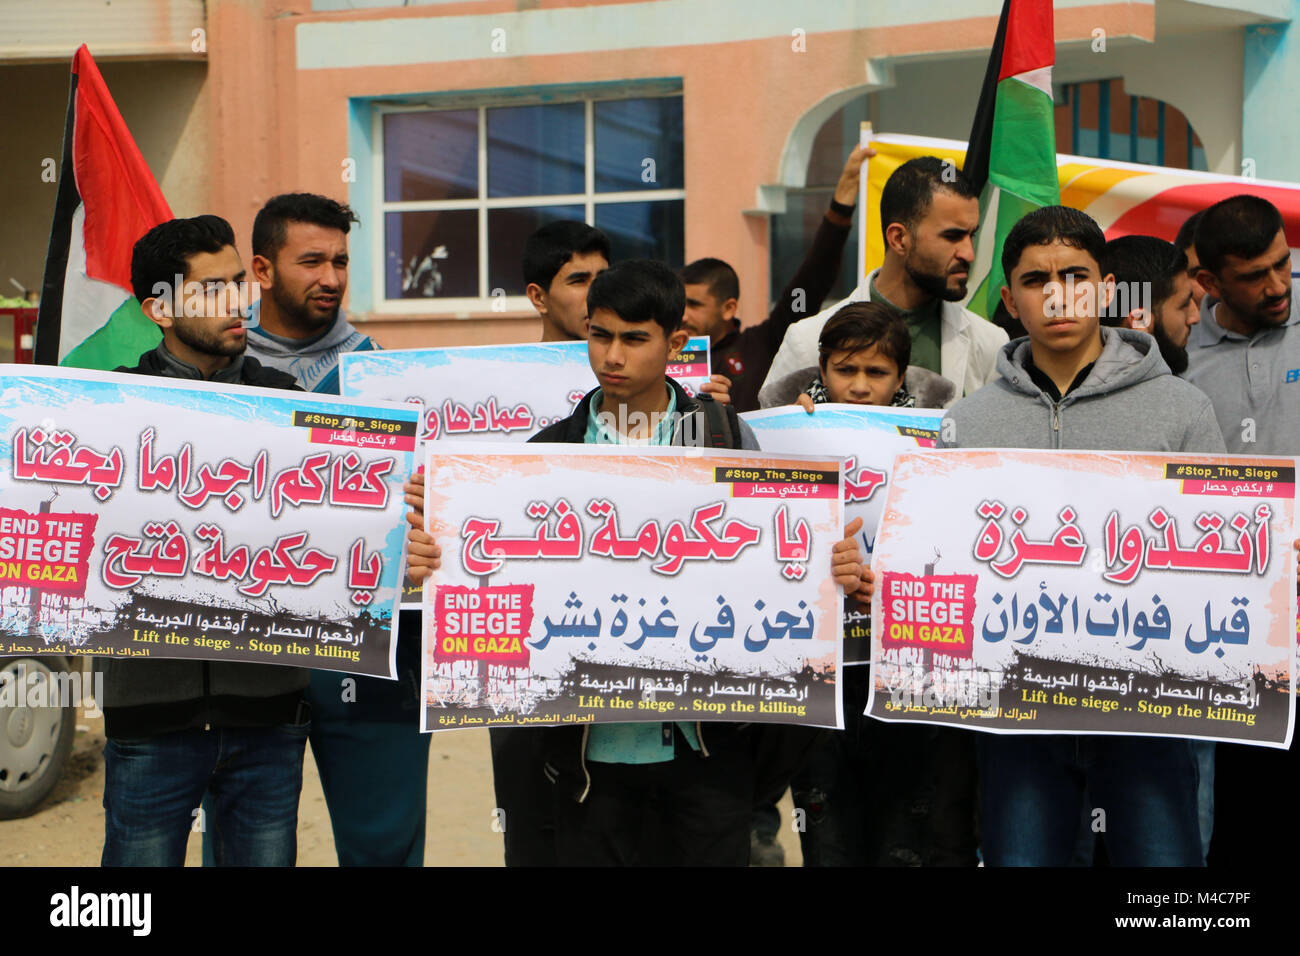 February 15, 2018 - The 'popular movement to break the siege of Gaza'' organise a protest in Beit Hanoun, at the gate of the Erez crossing between Israel and Gaza in northern Gaza, against the Israeli siege on the Gaza Strip. Protesters called for the lift of the land, sea and air blockade on Gaza which Israel has imposed on the Gaza Strip over the last decade, and for the rights of the Palestinians in Gaza to be respected, including their rights to go abroad for education purposes and medical treatments. They also demanded the lifting of the punitive administrative and financial measures i Stock Photo